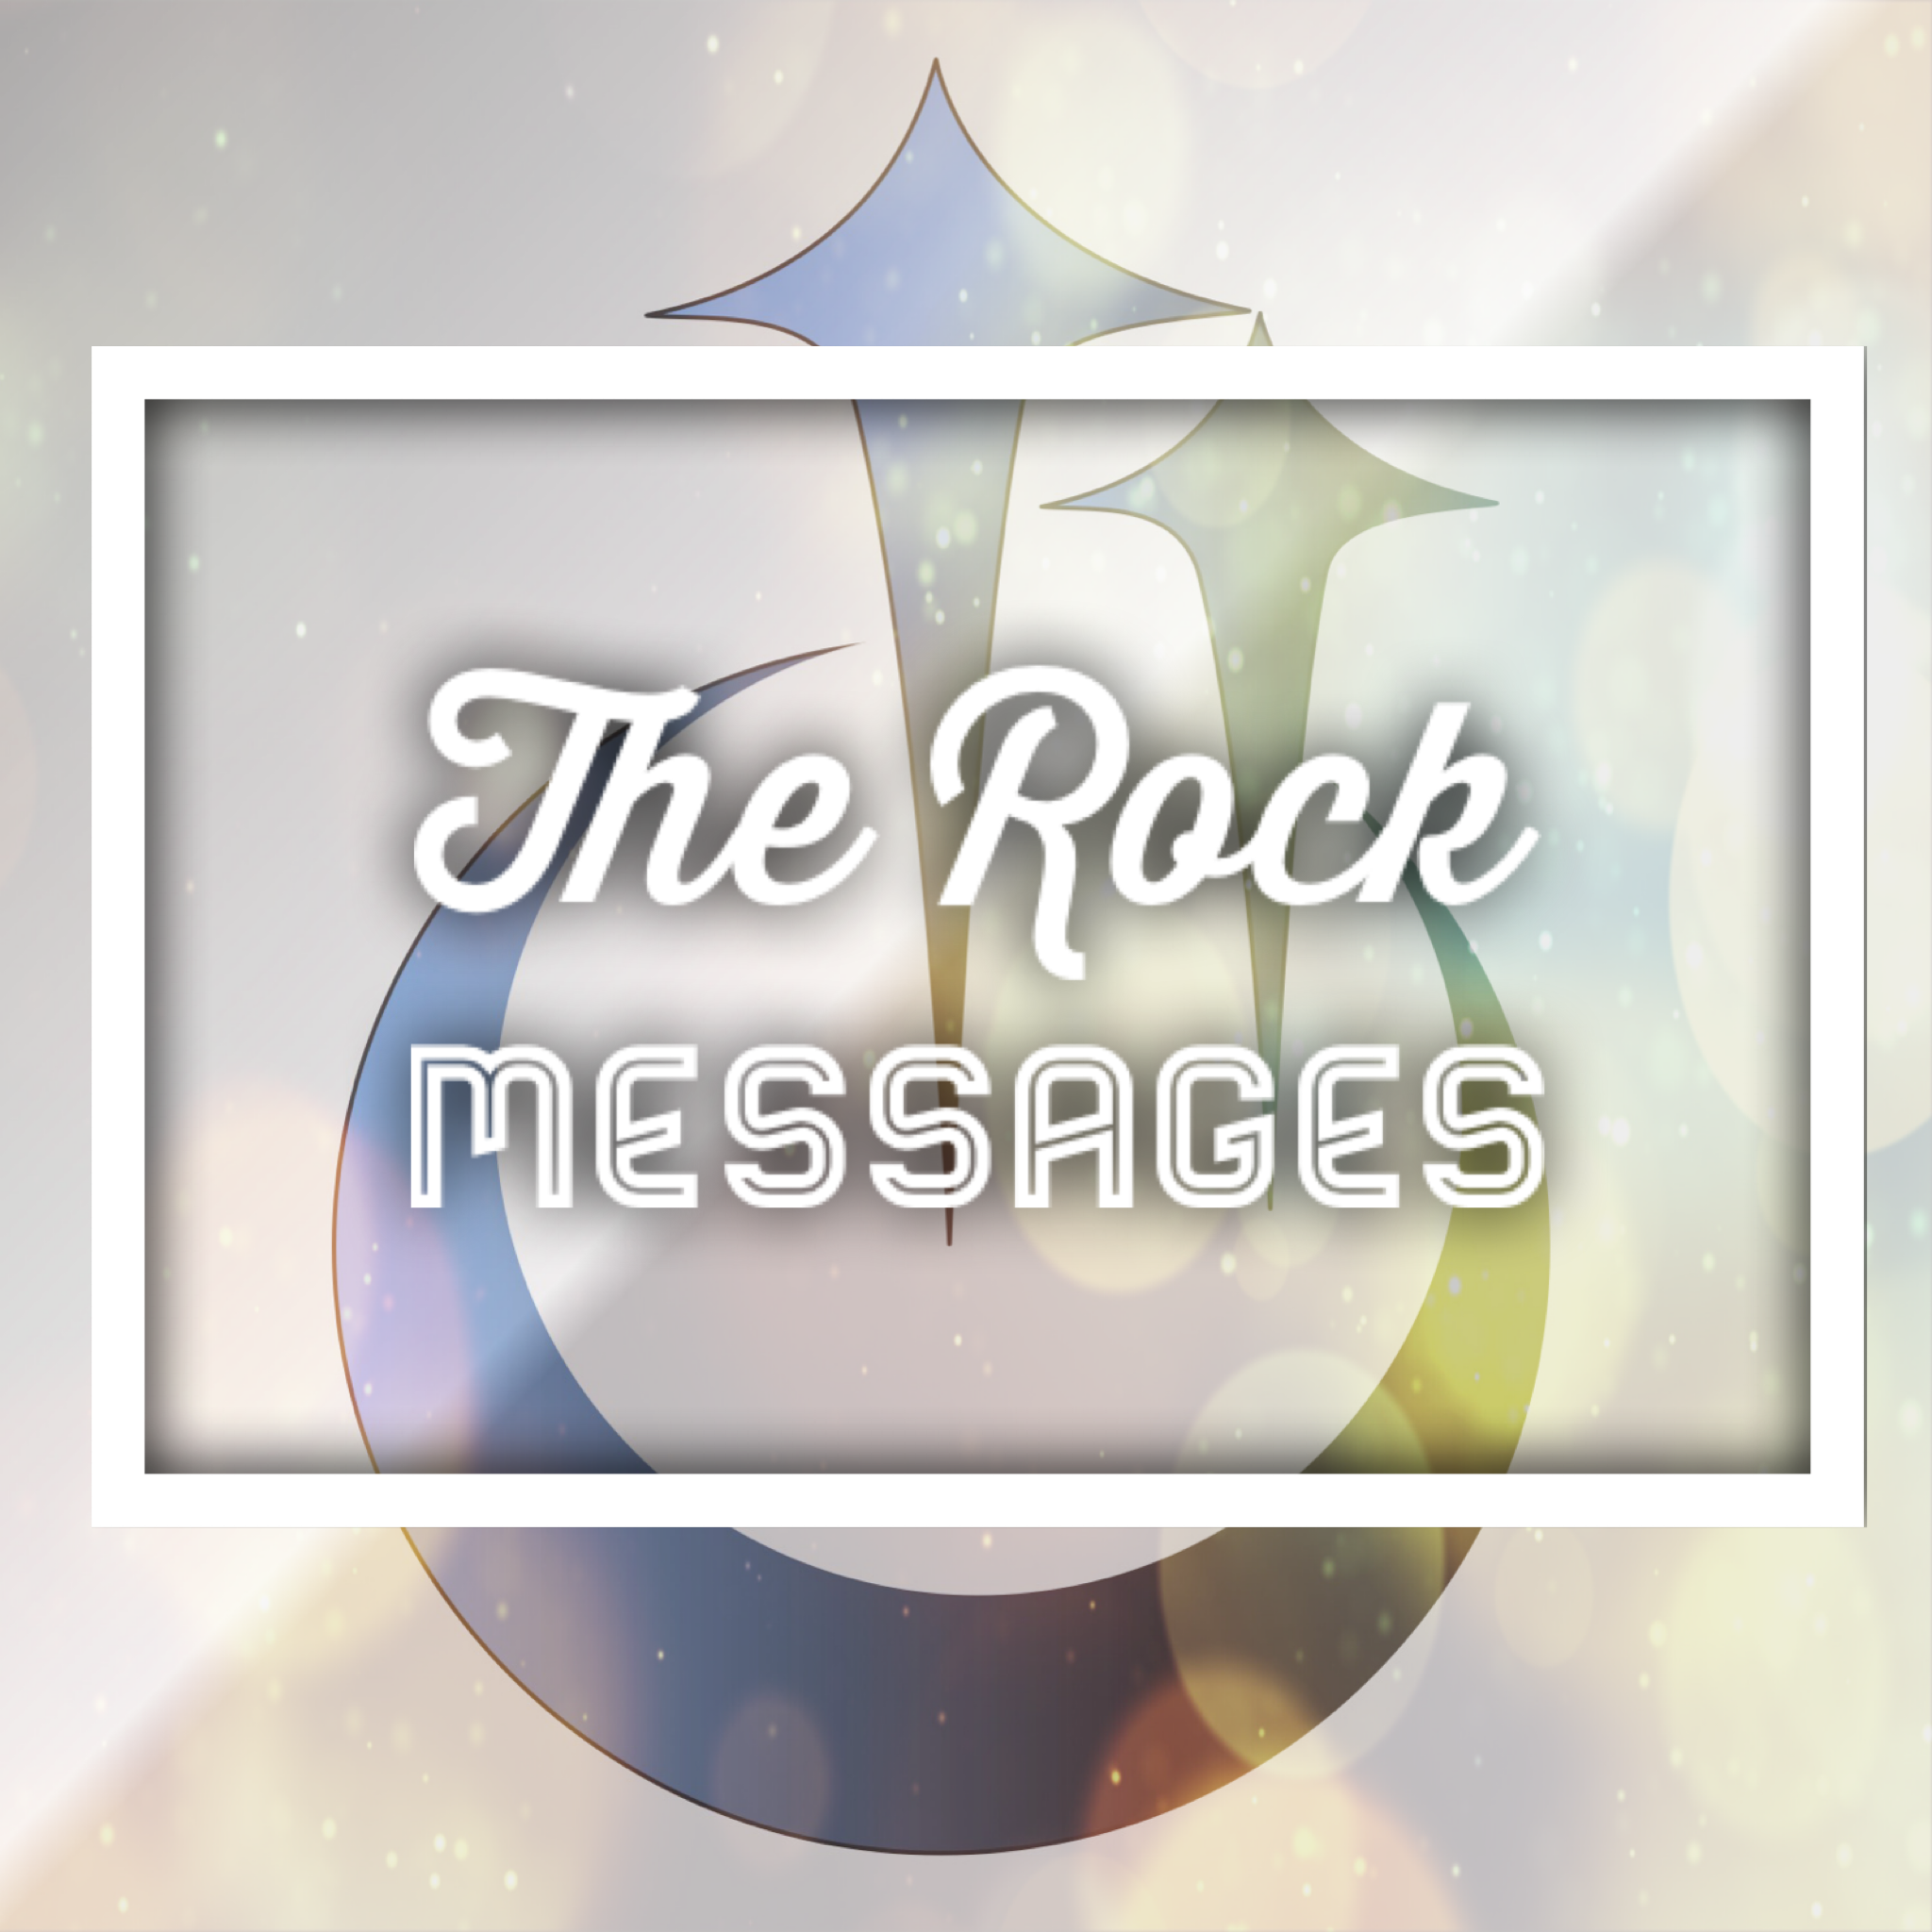 The Rock: Messages